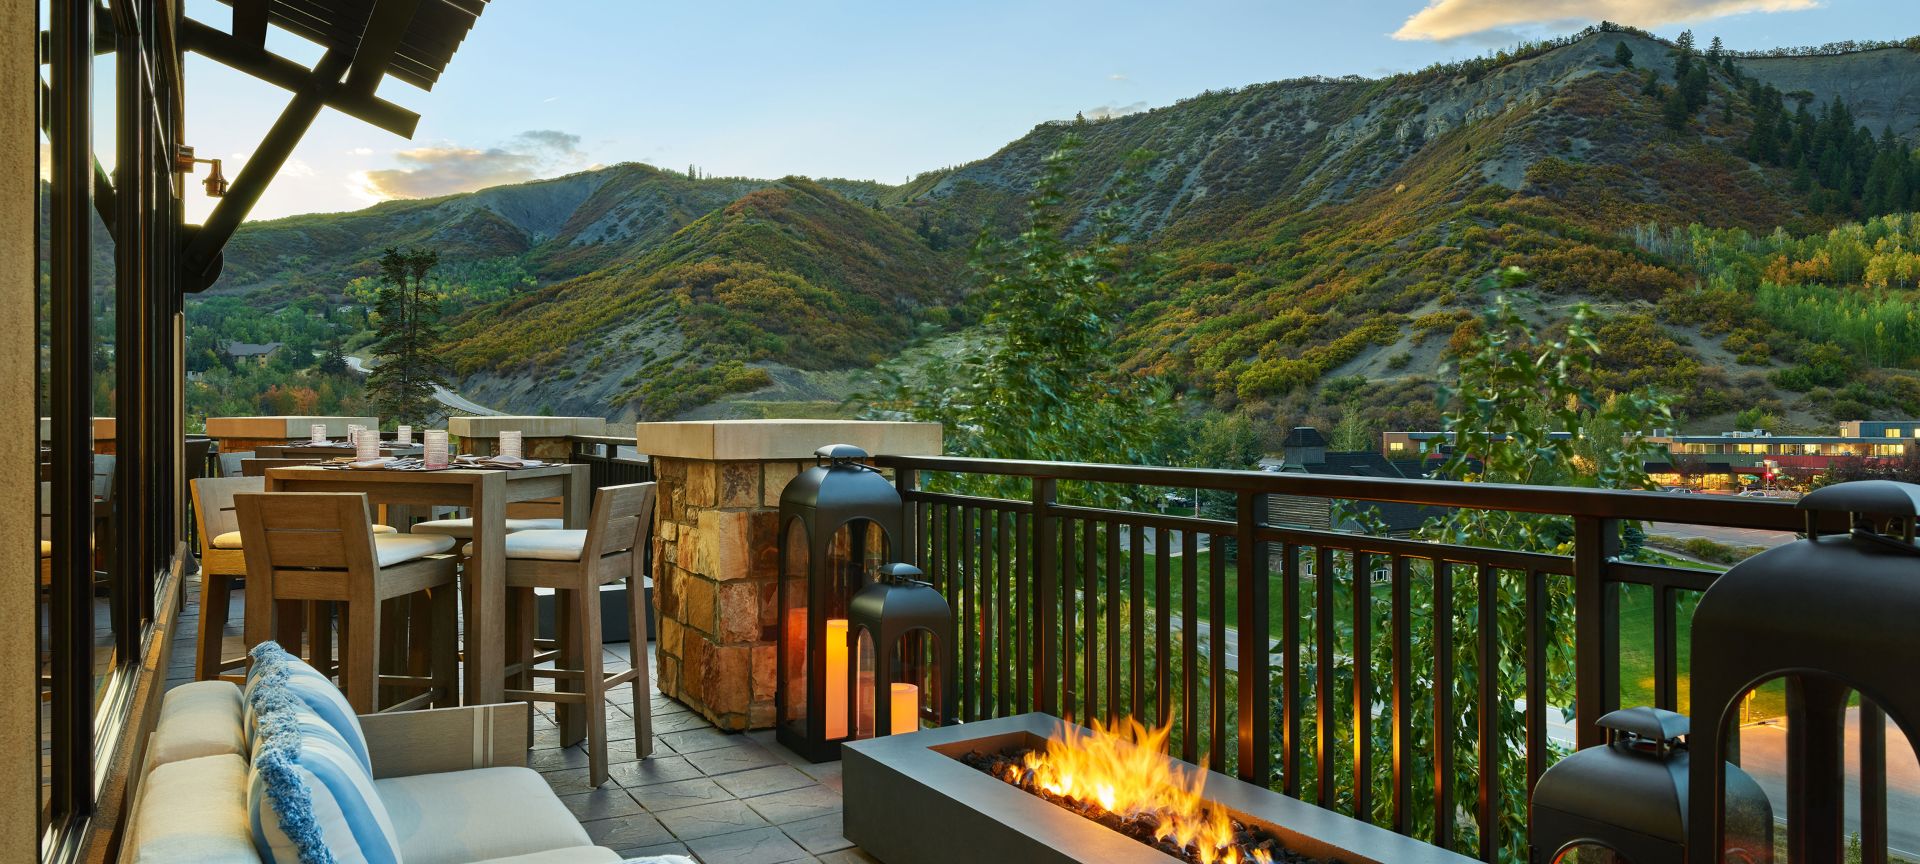 Outdoor event space with a firepit and view of Snowmass